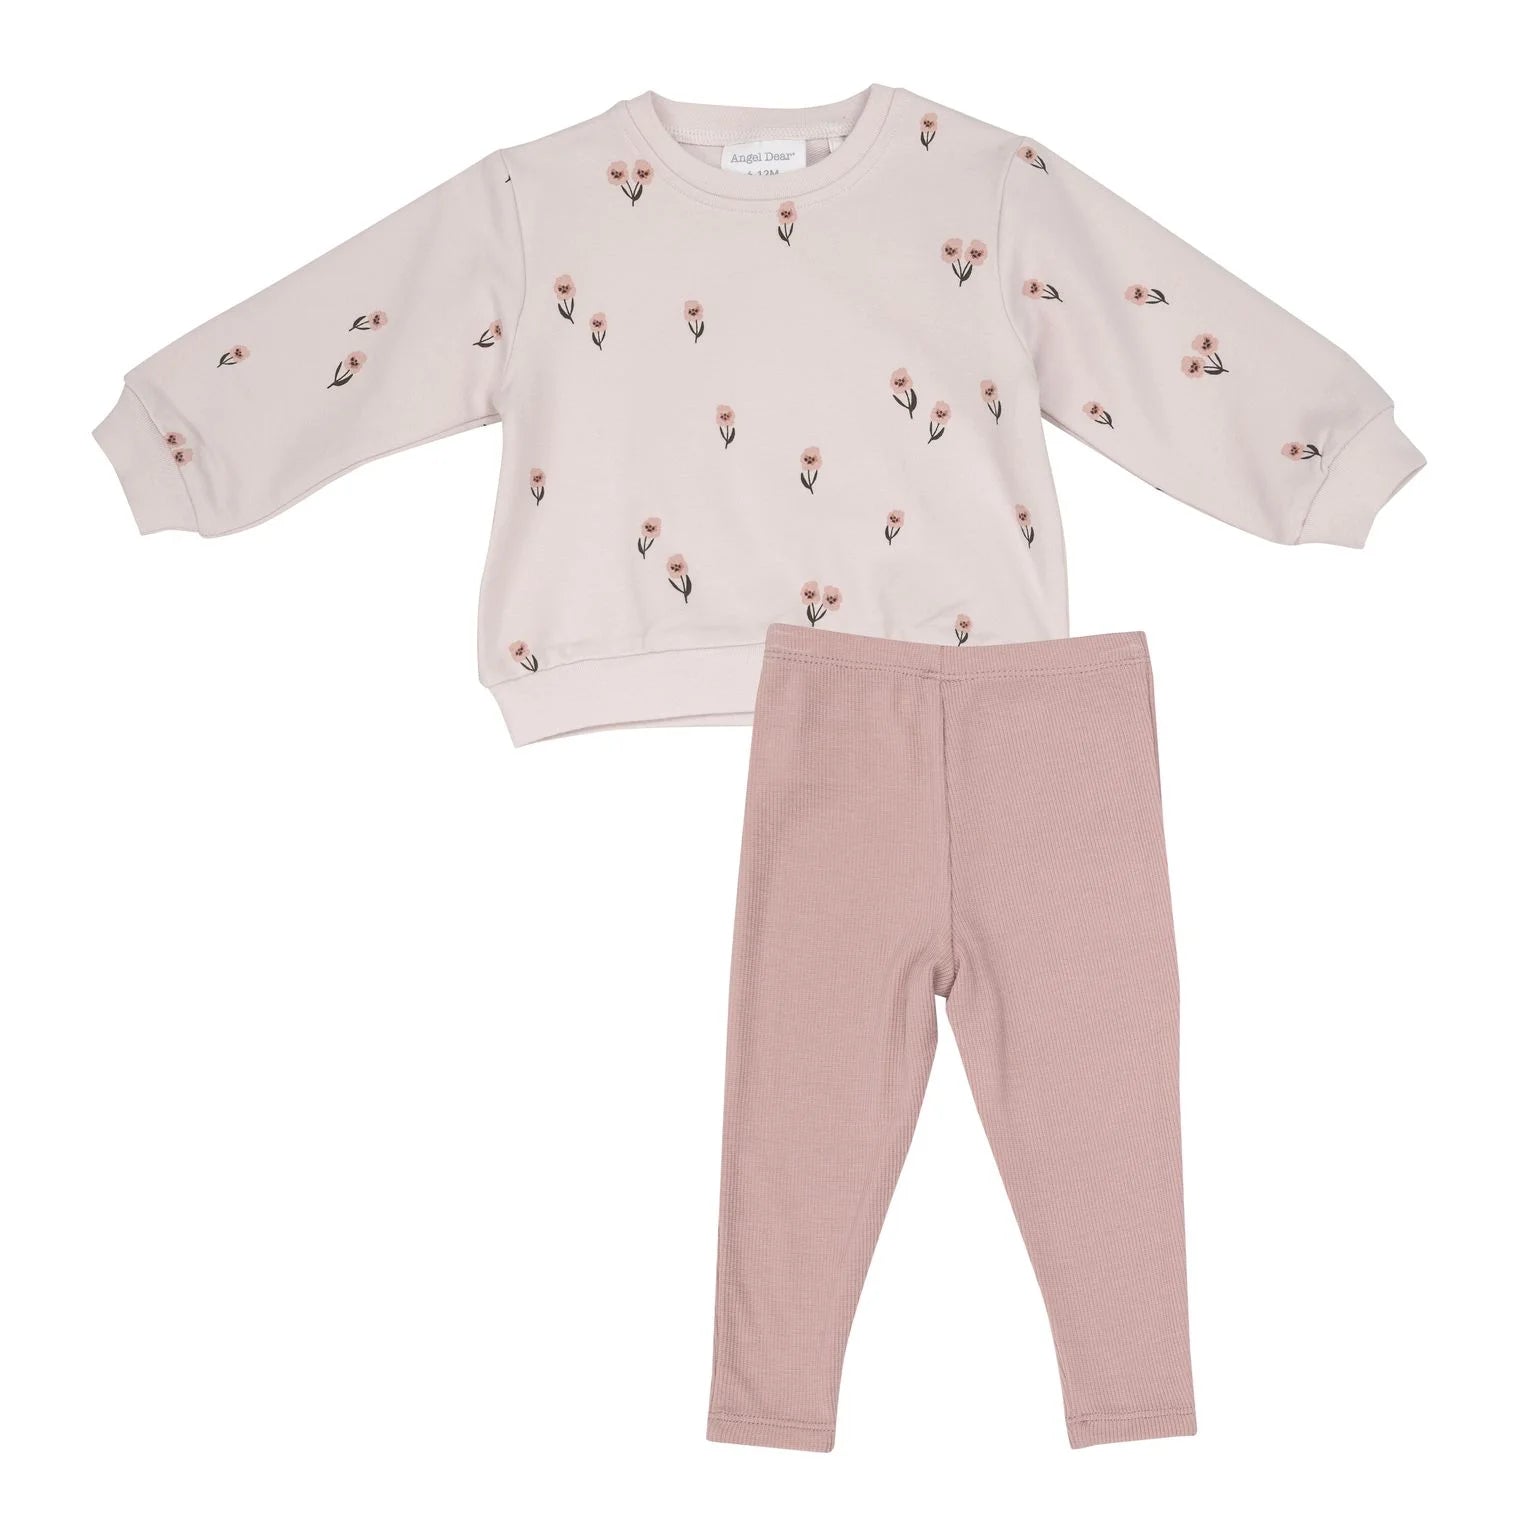 pink floral top and pink legging for kids